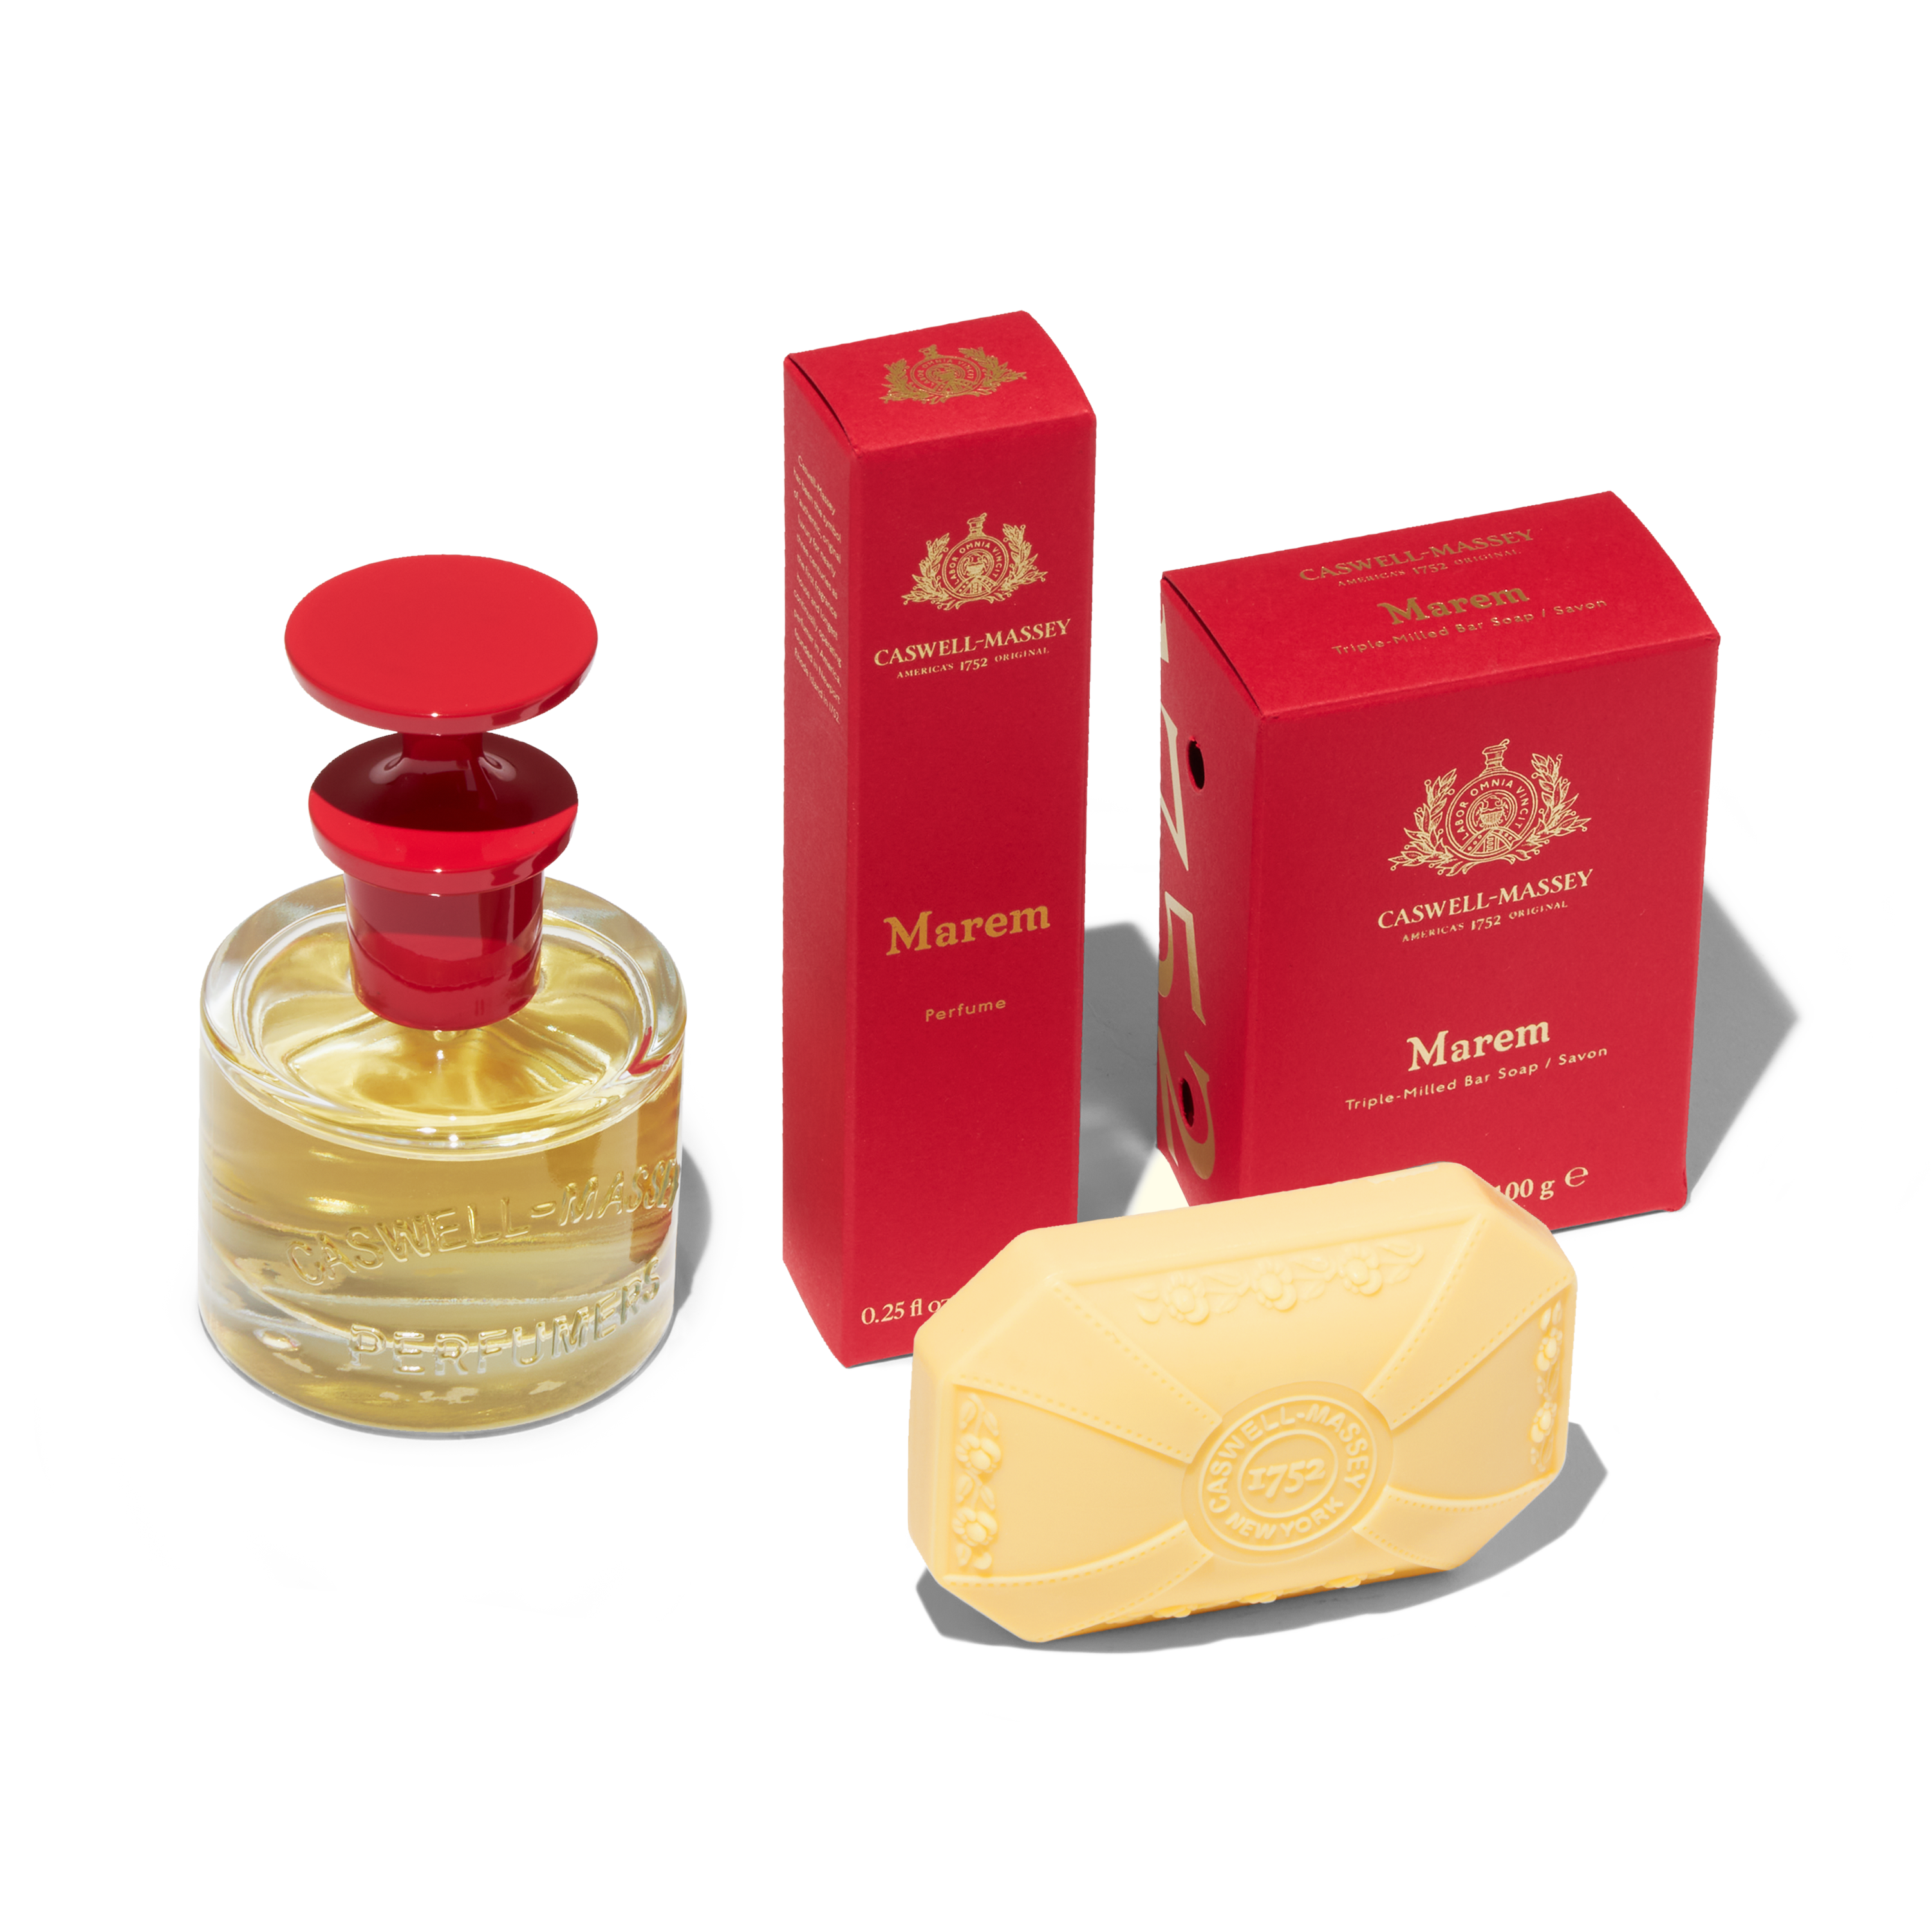 Caswell-Massey Marem Perfume: full-size 60 ml, discovery-size 7.5 ml, and Marem Bath Soap